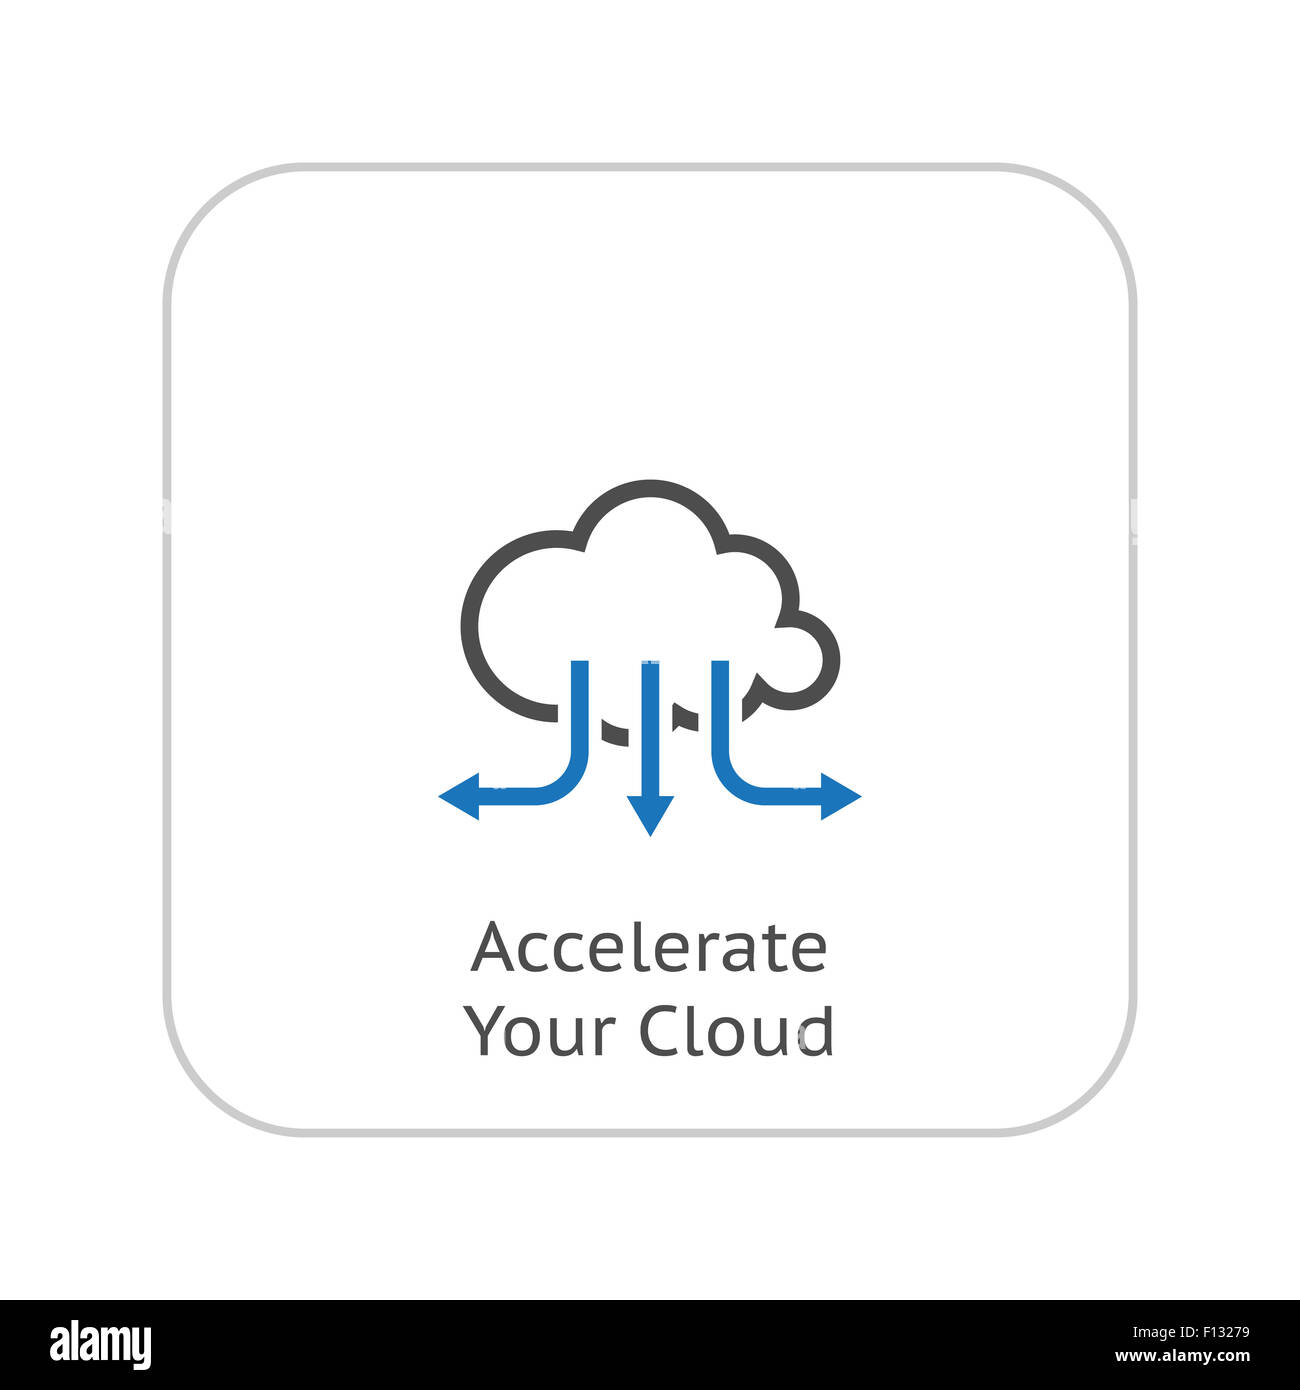 Accelerate Your Cloud Icon. Business Concept. Flat Design. Isolated Illustration. Stock Photo